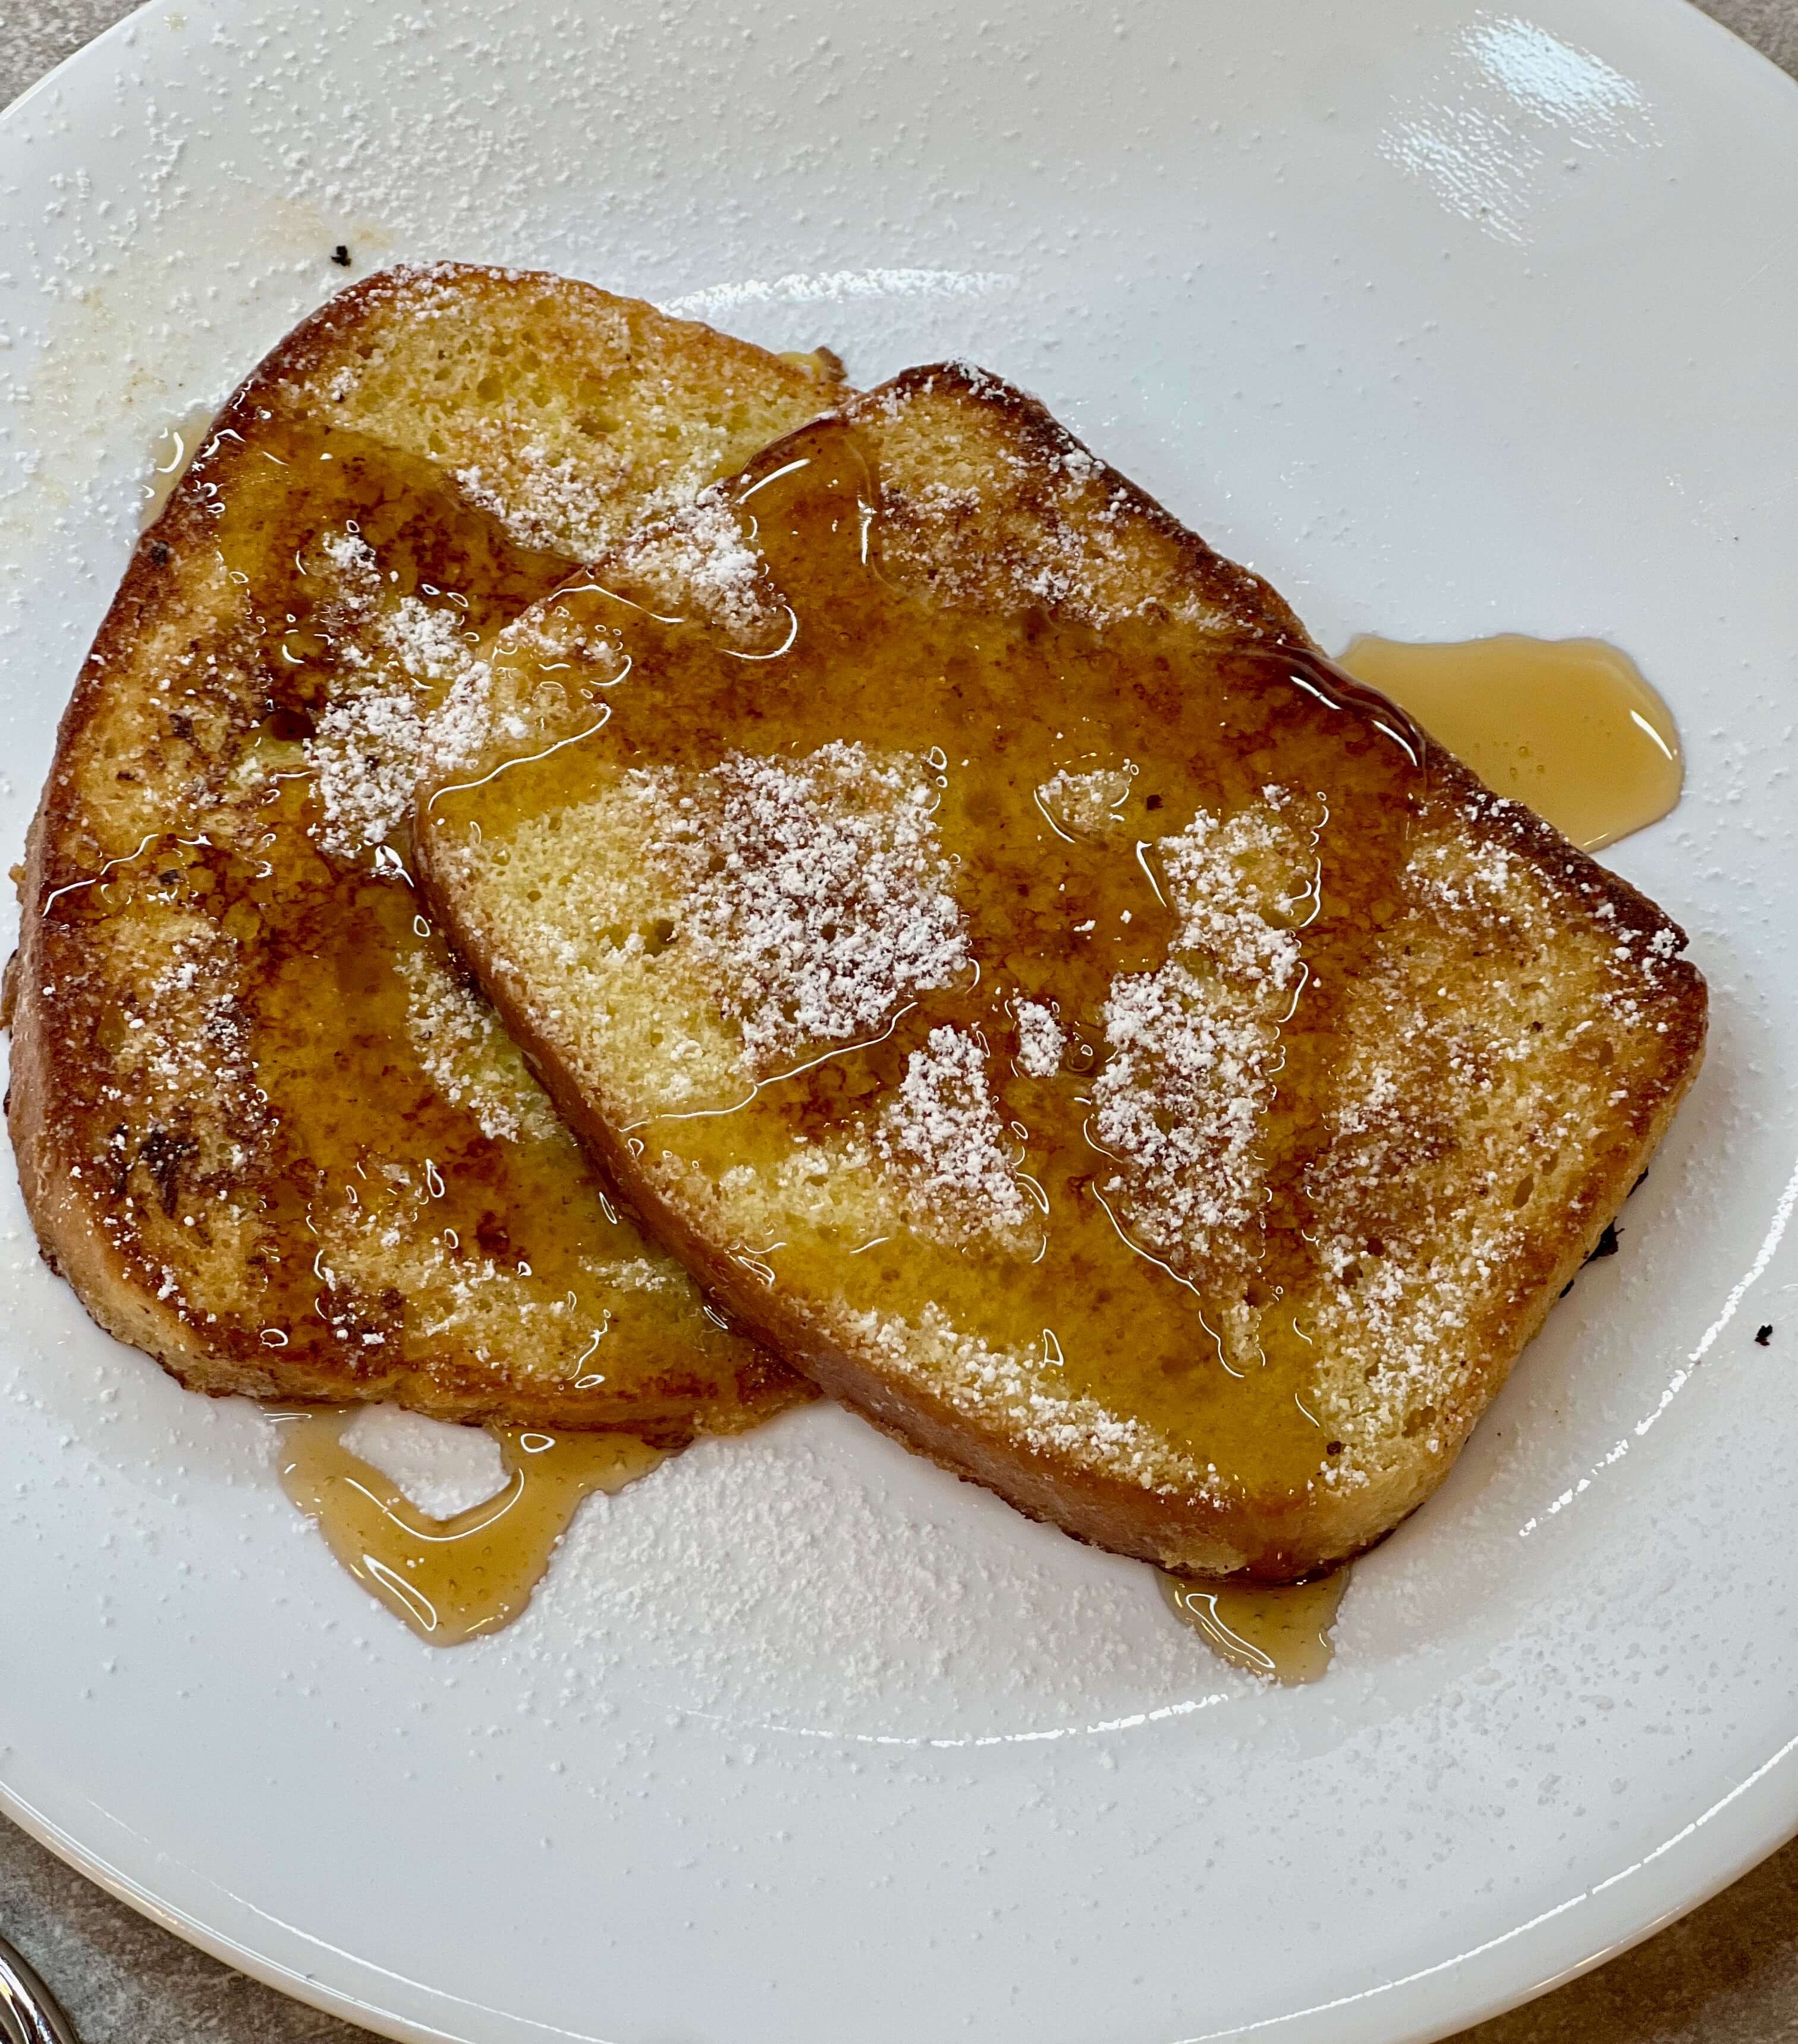 Finished French Toast with syrup and powdered sugar